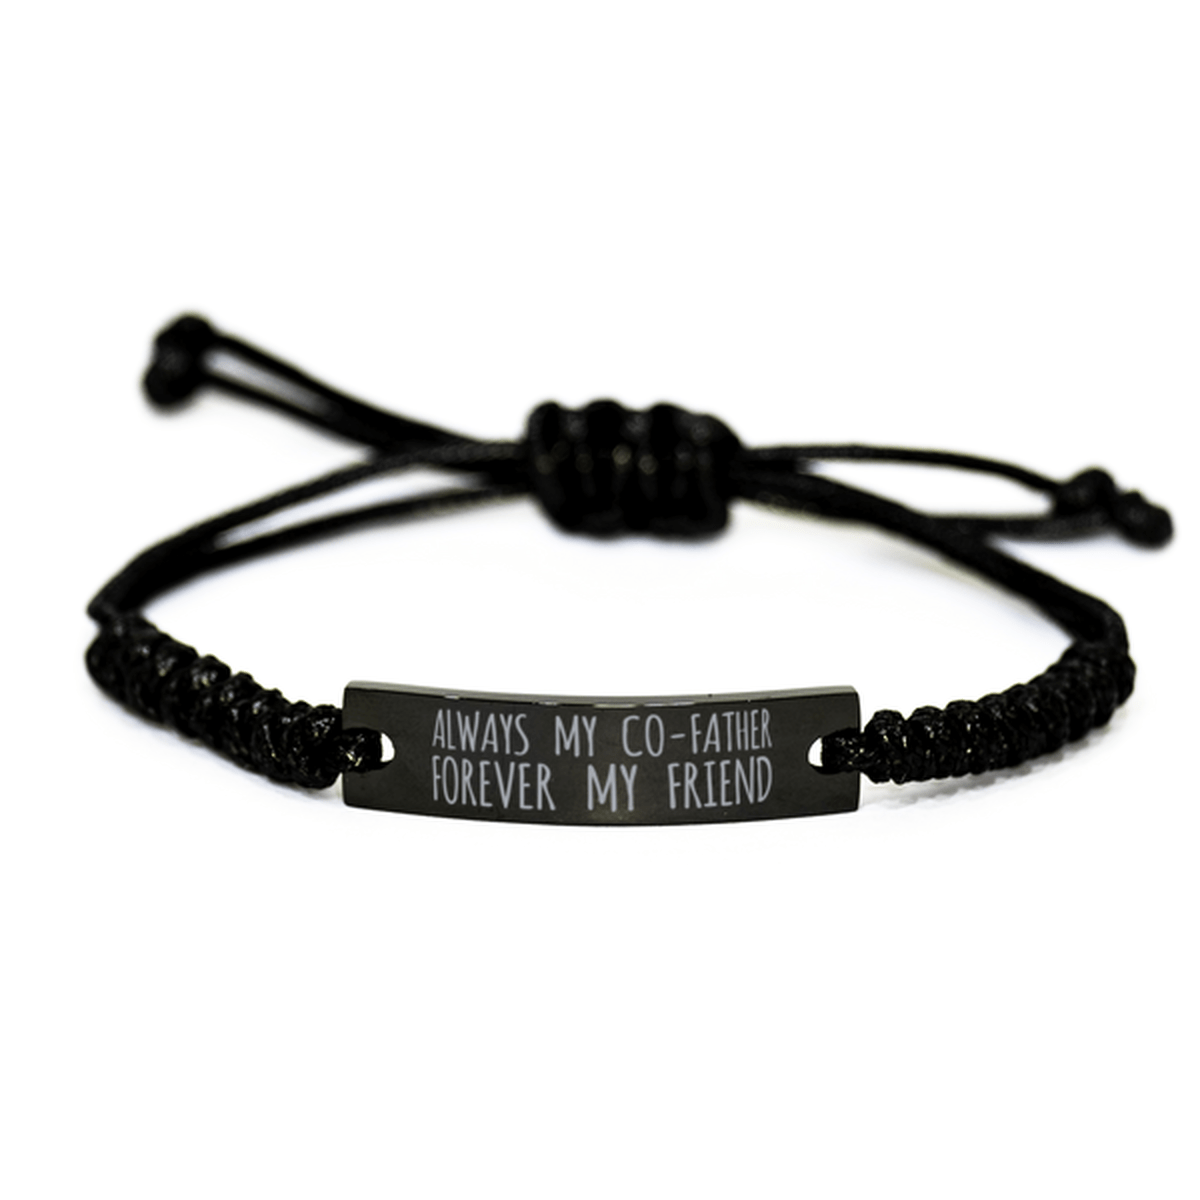 Inspirational Co-Father Black Rope Bracelet, Always My Co-Father Forever My Friend, Best Birthday Gifts For Family